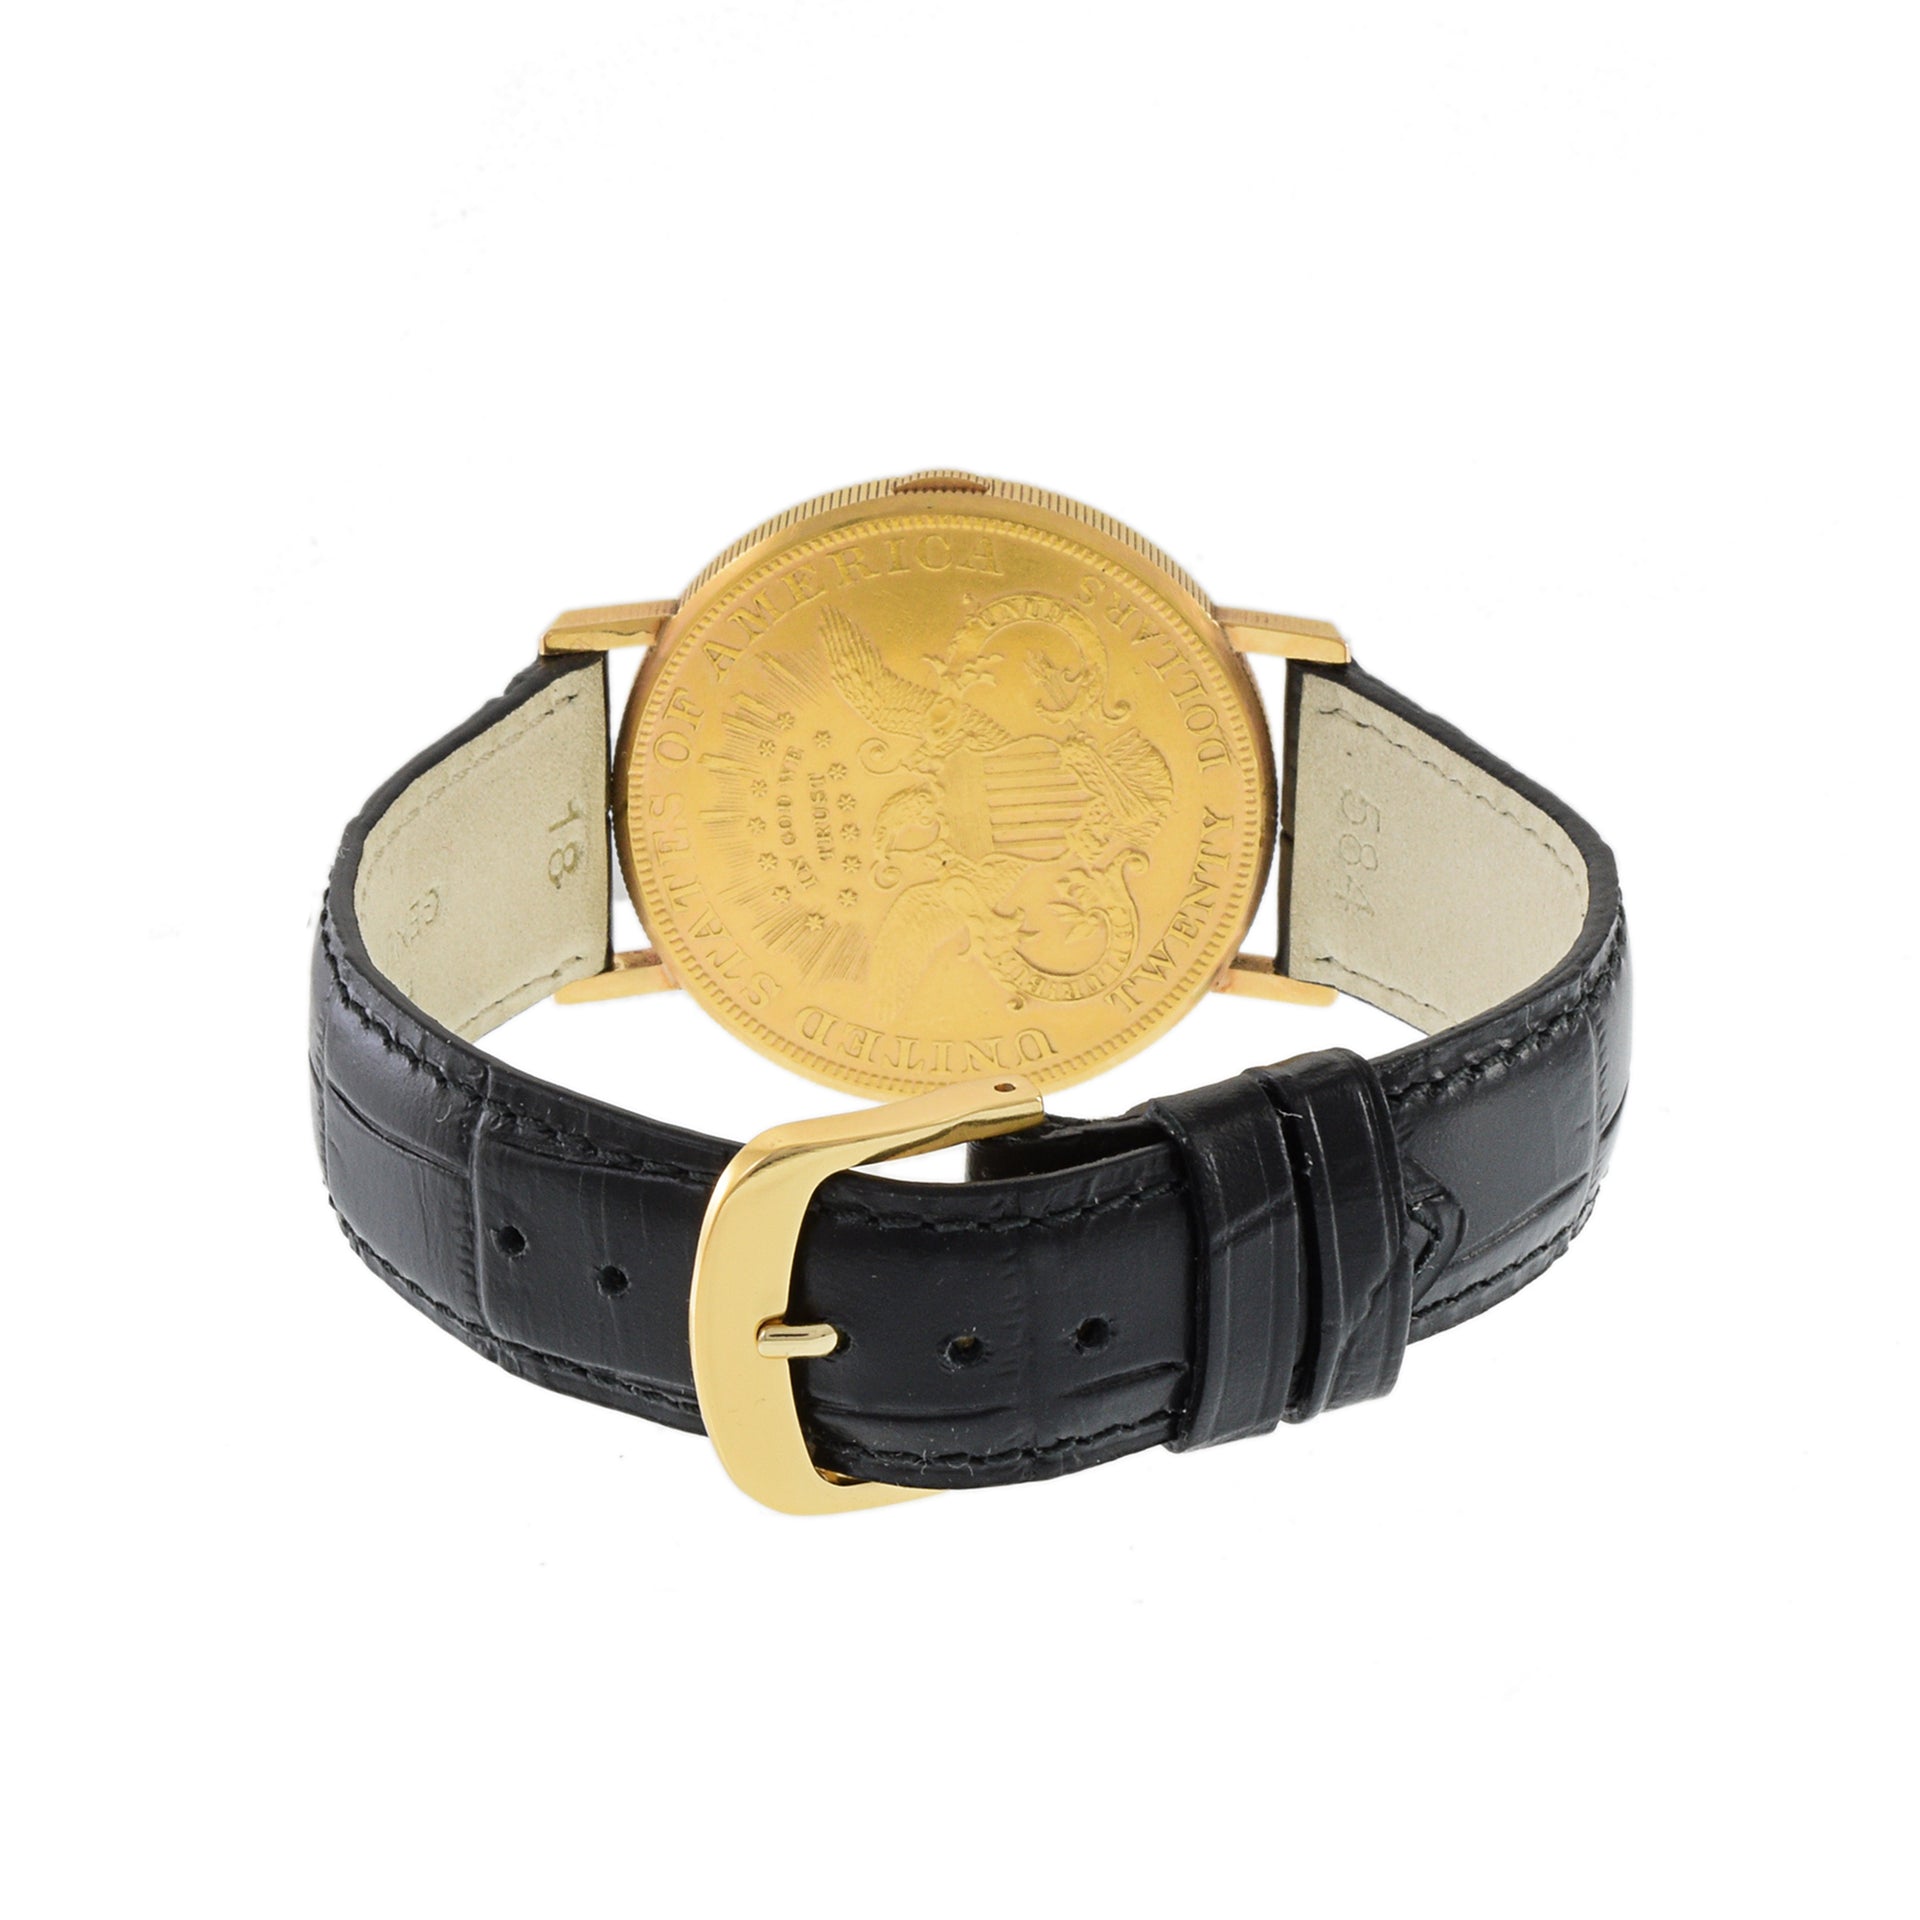 Paul Peugeot Twenty Dollar Manual Wind Coin Watch 18K Gold and 22K Gold